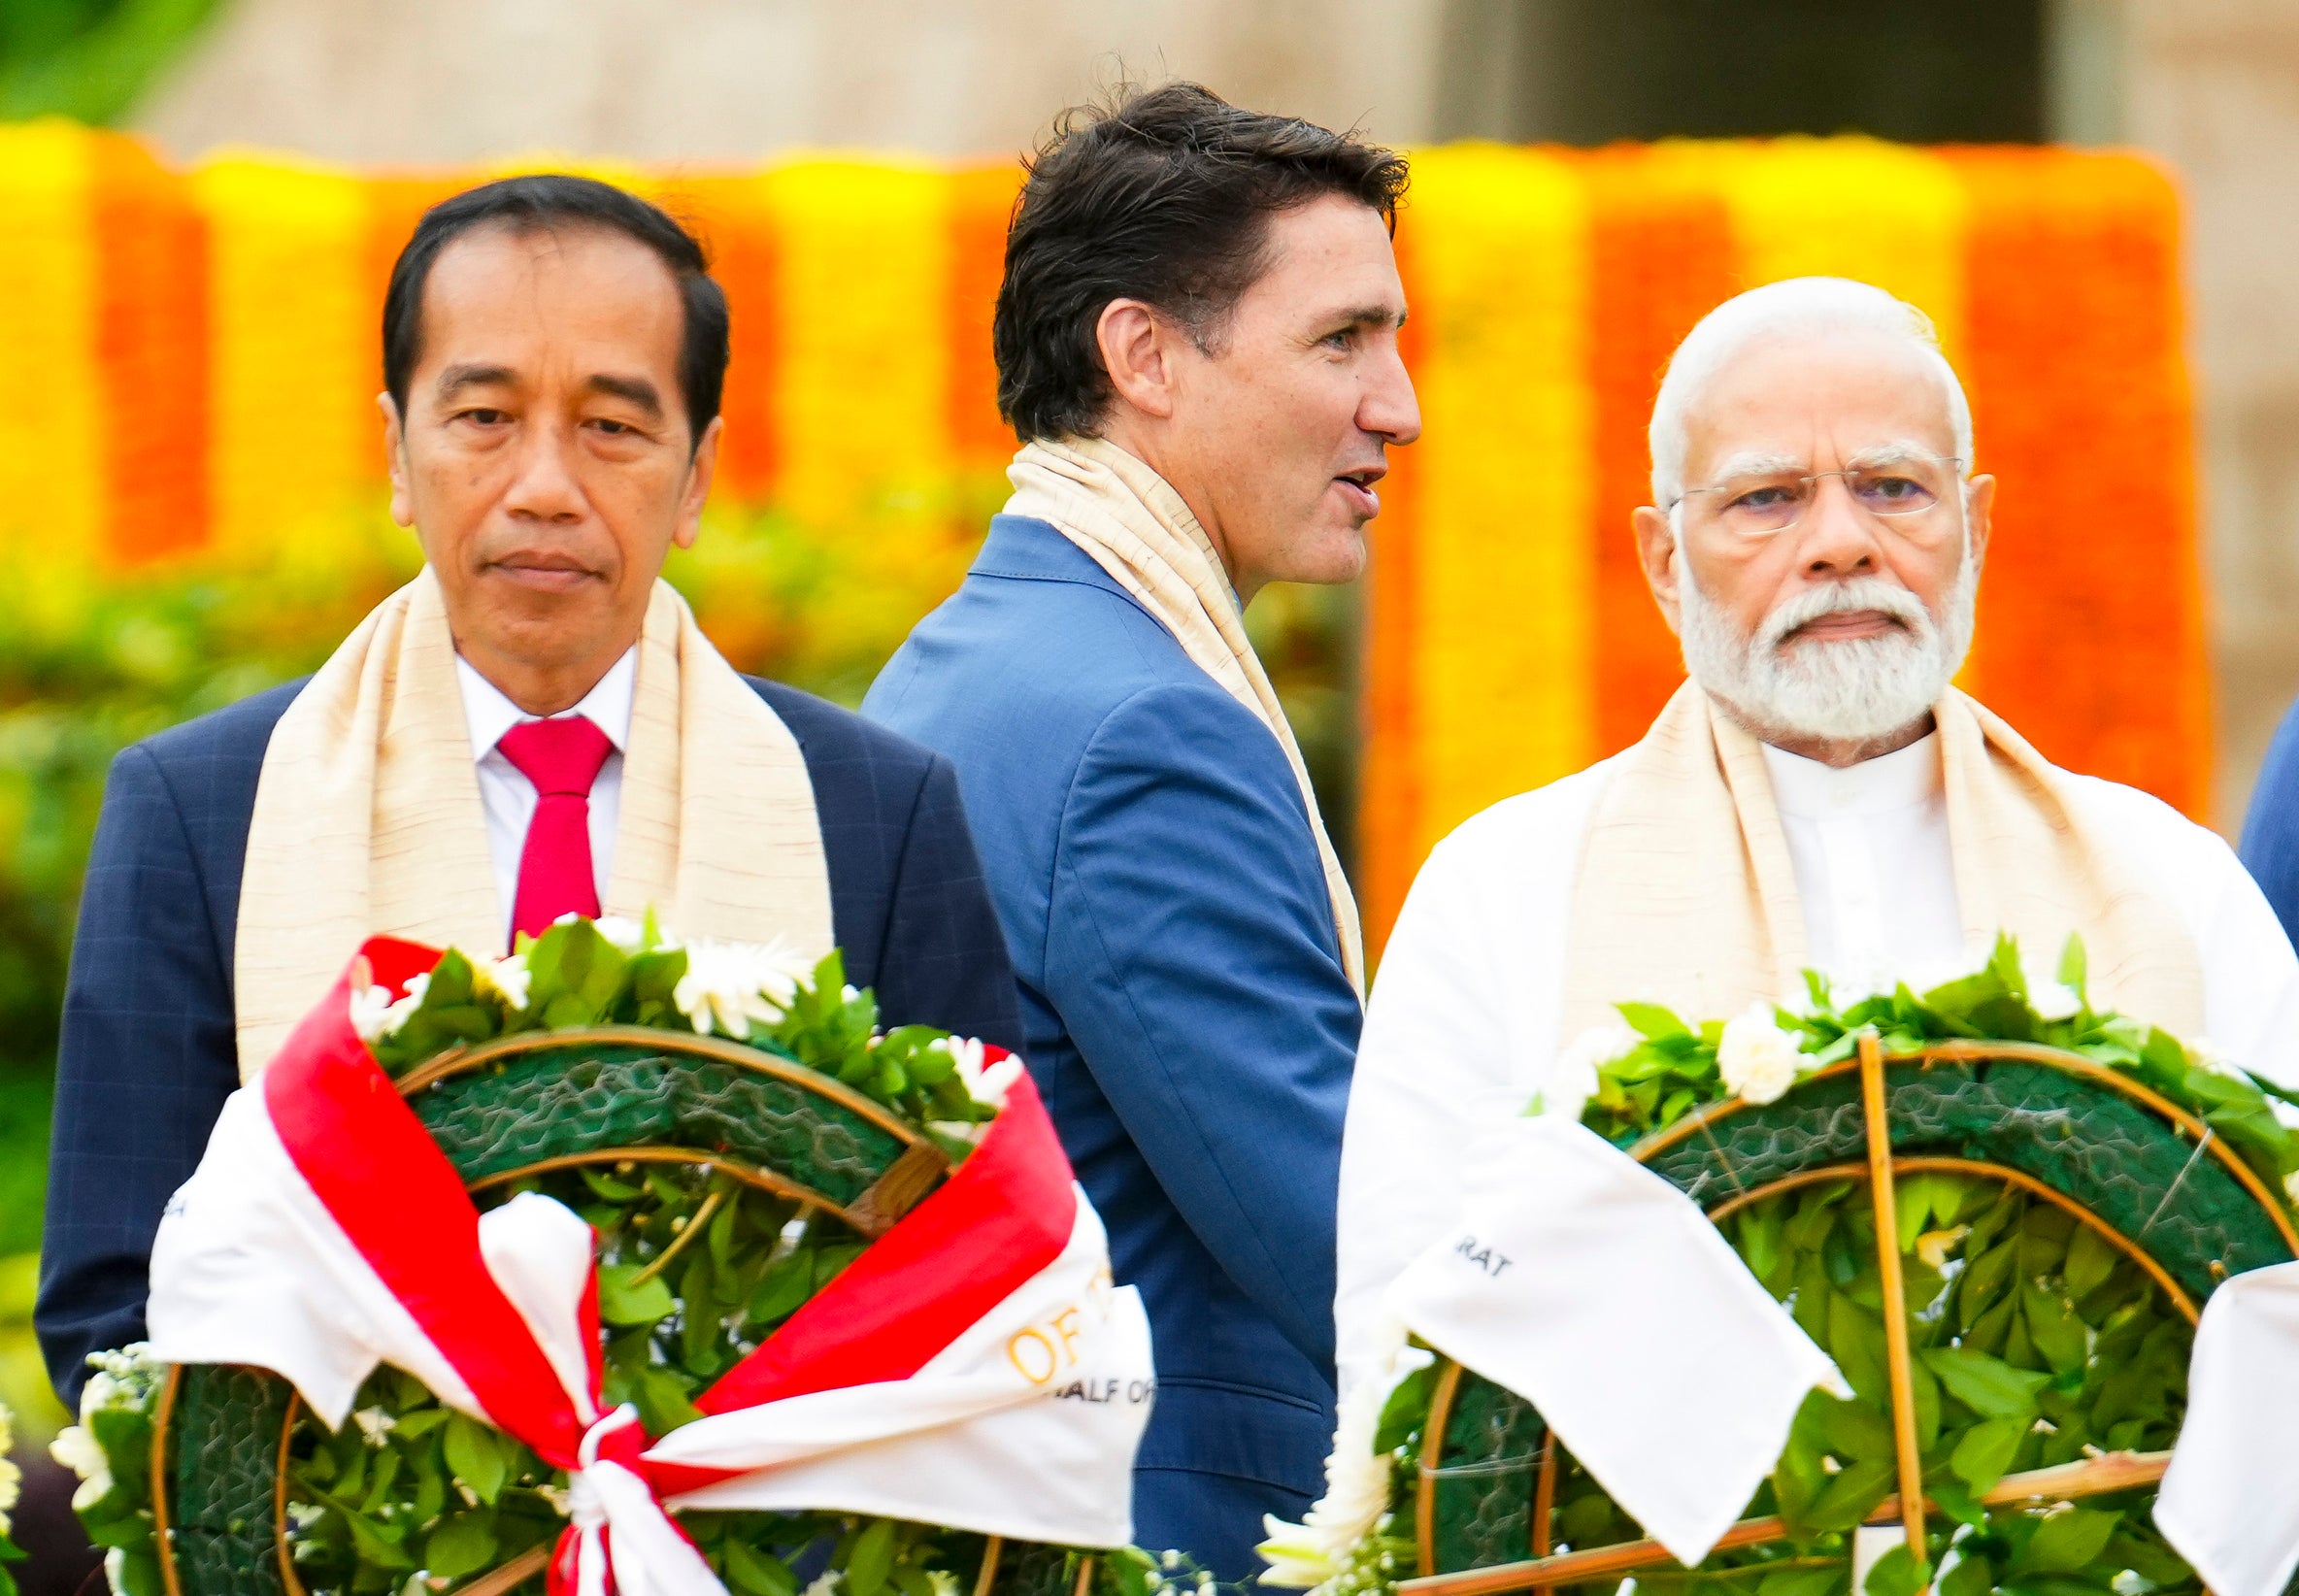 Trudeau walks past Narendra Modi and Indonesia’s president Joko Widodo as they take part in a wreath-laying ceremony at Raj Ghat (Mahatma Gandhi's cremation site) during the G20 Summit